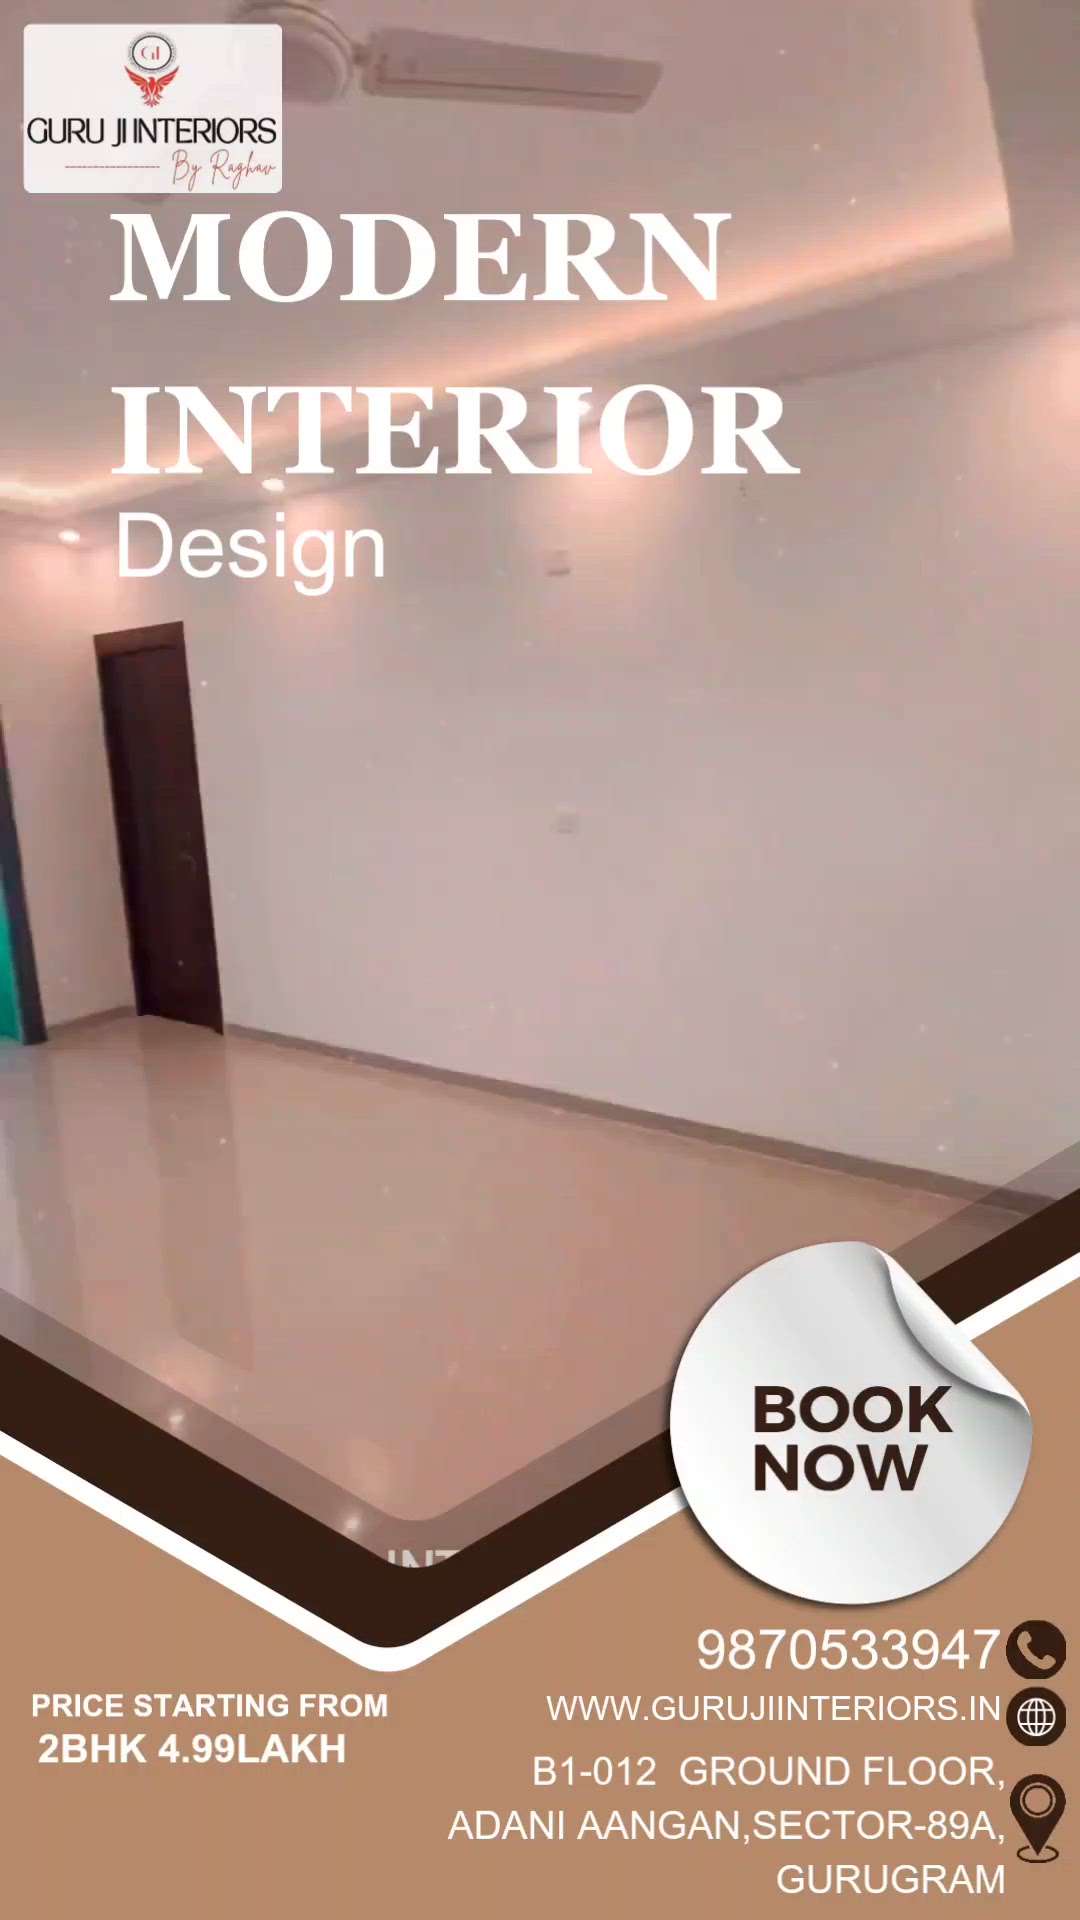 MODERN INTERIOR DESIGN 
👉🏻 Get High Quality and Modern Interior Design For Your Dream Home - At Affordable Price 
.
Guru ji interiors
By Raghav
Call - 9870533947 
#gurujiinteriors
#Interiordesign #luxuryhomes
#PerfectInterior #homedecore